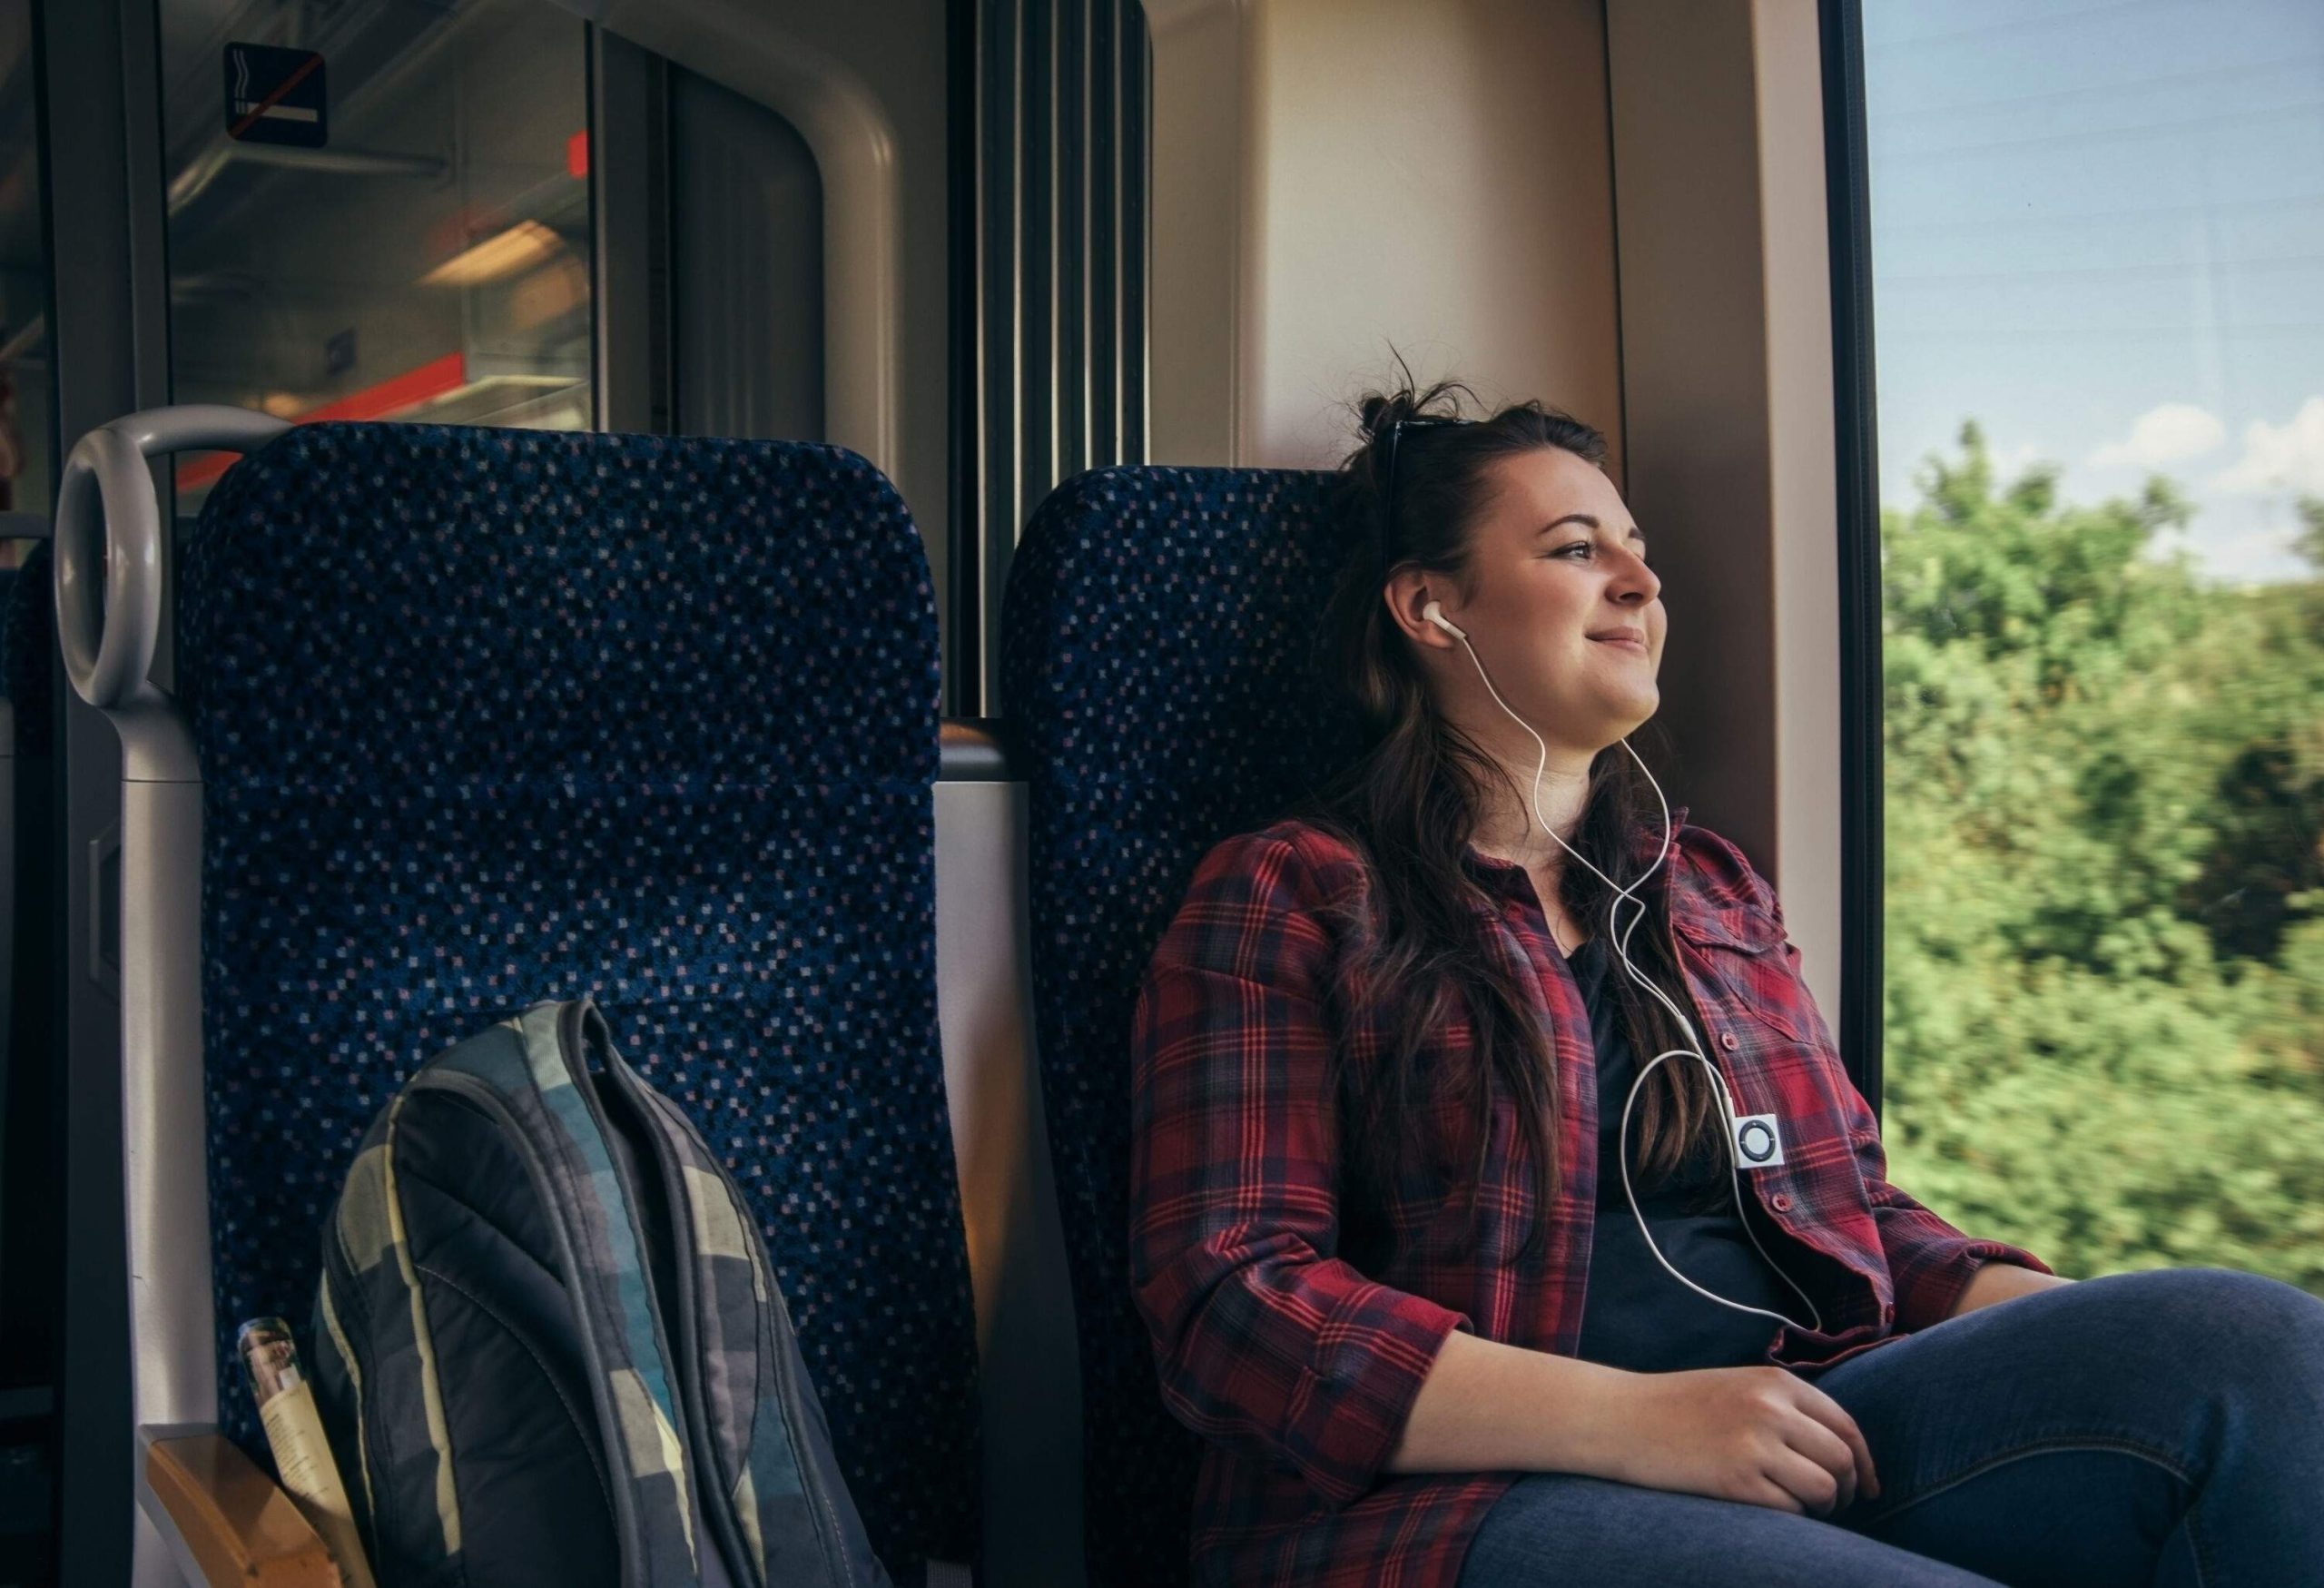 A smiling woman seated on the train gazed out of the window with an earpiece on her ears.